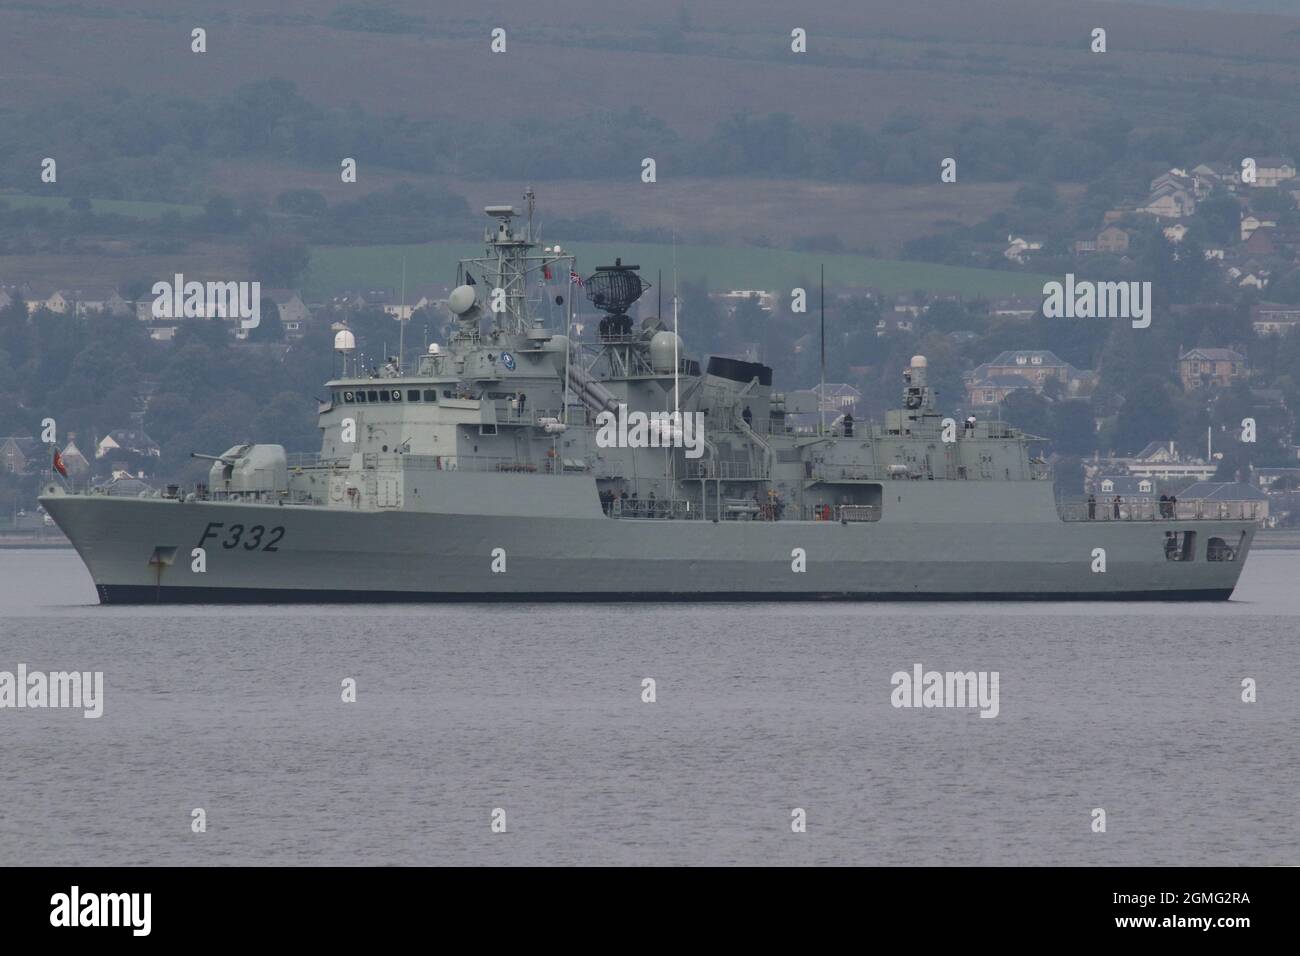 NRP Corte-Real (F332), a Vasco da Gama-class frigate operated by the Portuguese Navy, off Greenock prior to participating in the military exercises Dynamic Mariner 2021 and Joint Warrior 21-2. Stock Photo